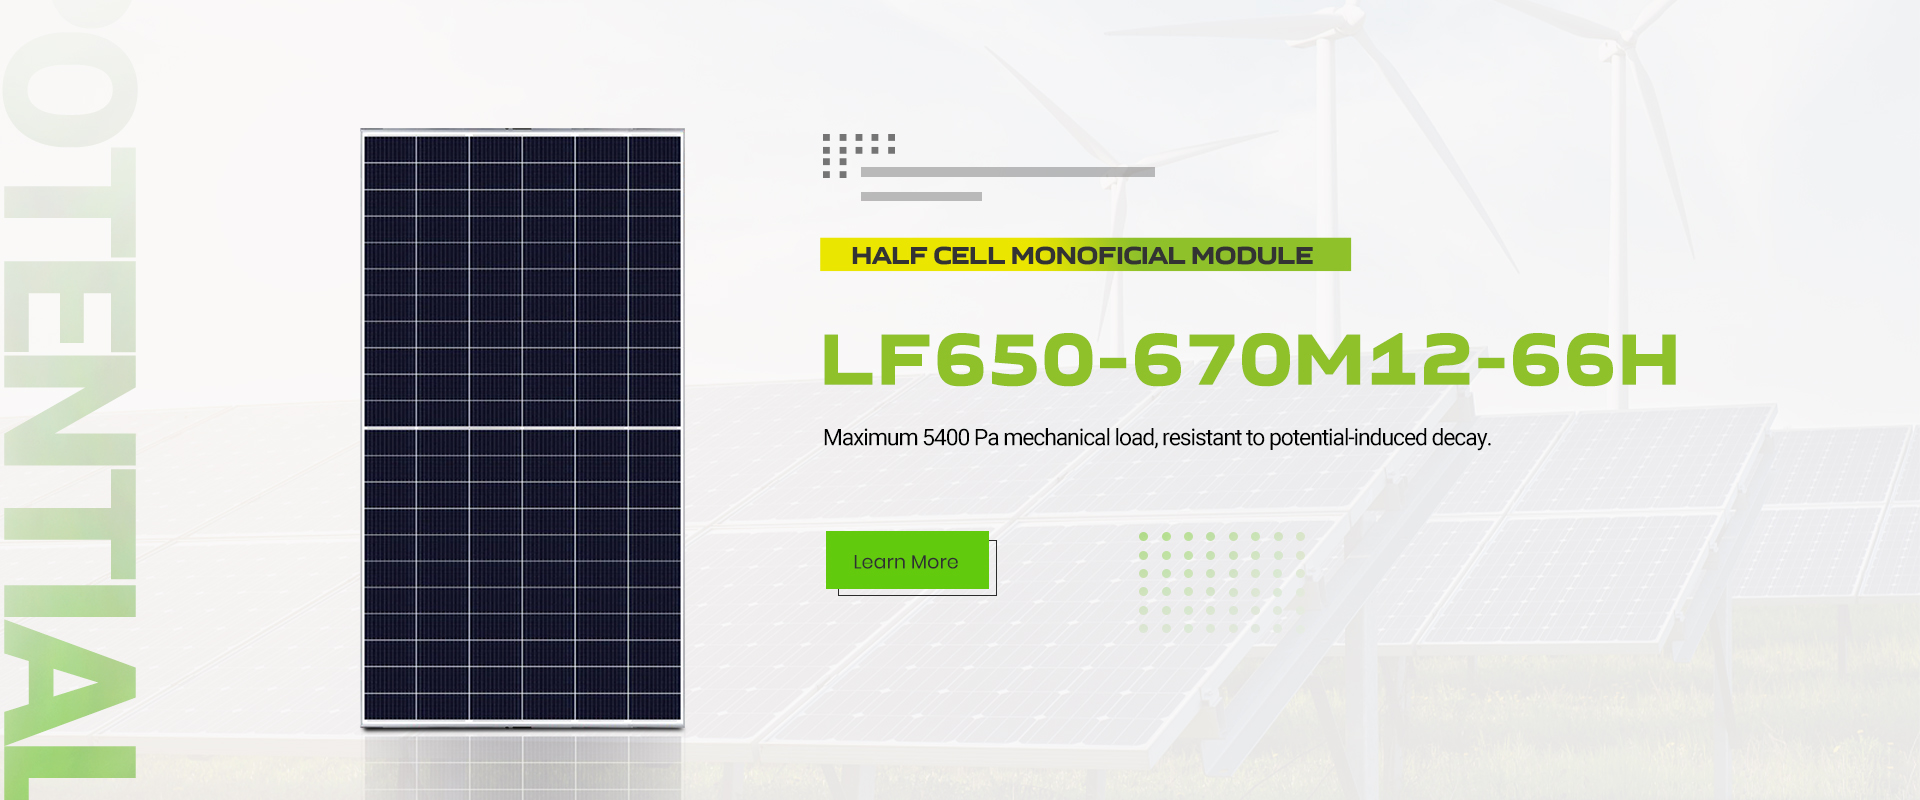 lefeng-wholesale-high-efficiency-132-half-cell-bifacial-solar-module-645-670w-monocrystalline-silicon-photovoltaic-module-210mm-solar-panel-product